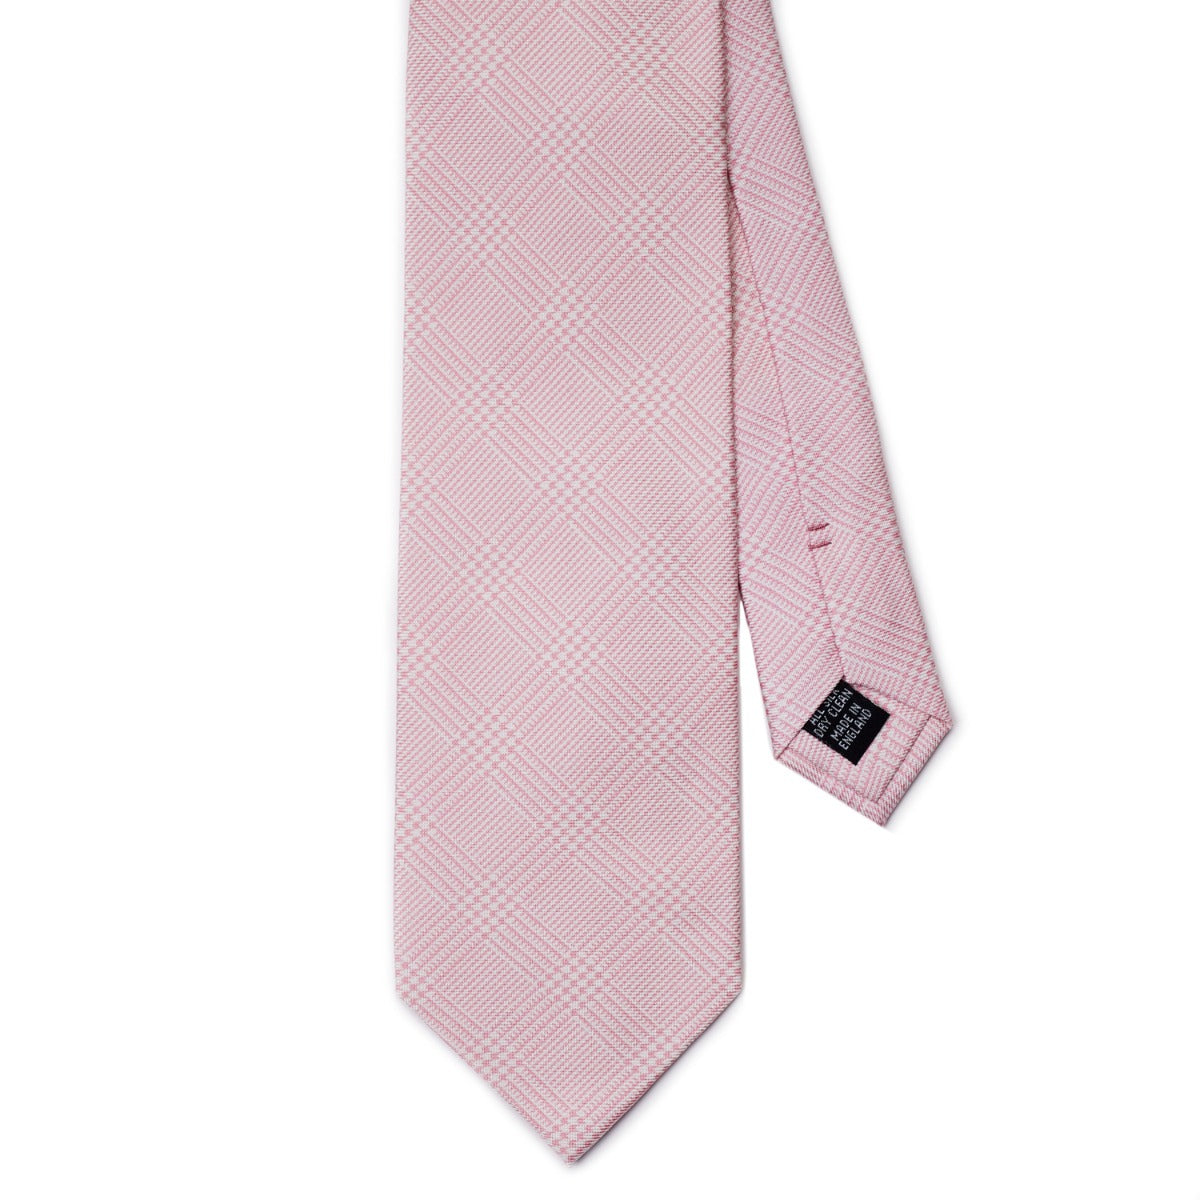 A Sovereign Grade Pink Prince of Wales Check, 150 CM tie from KirbyAllison.com on a white background from United Kingdom.